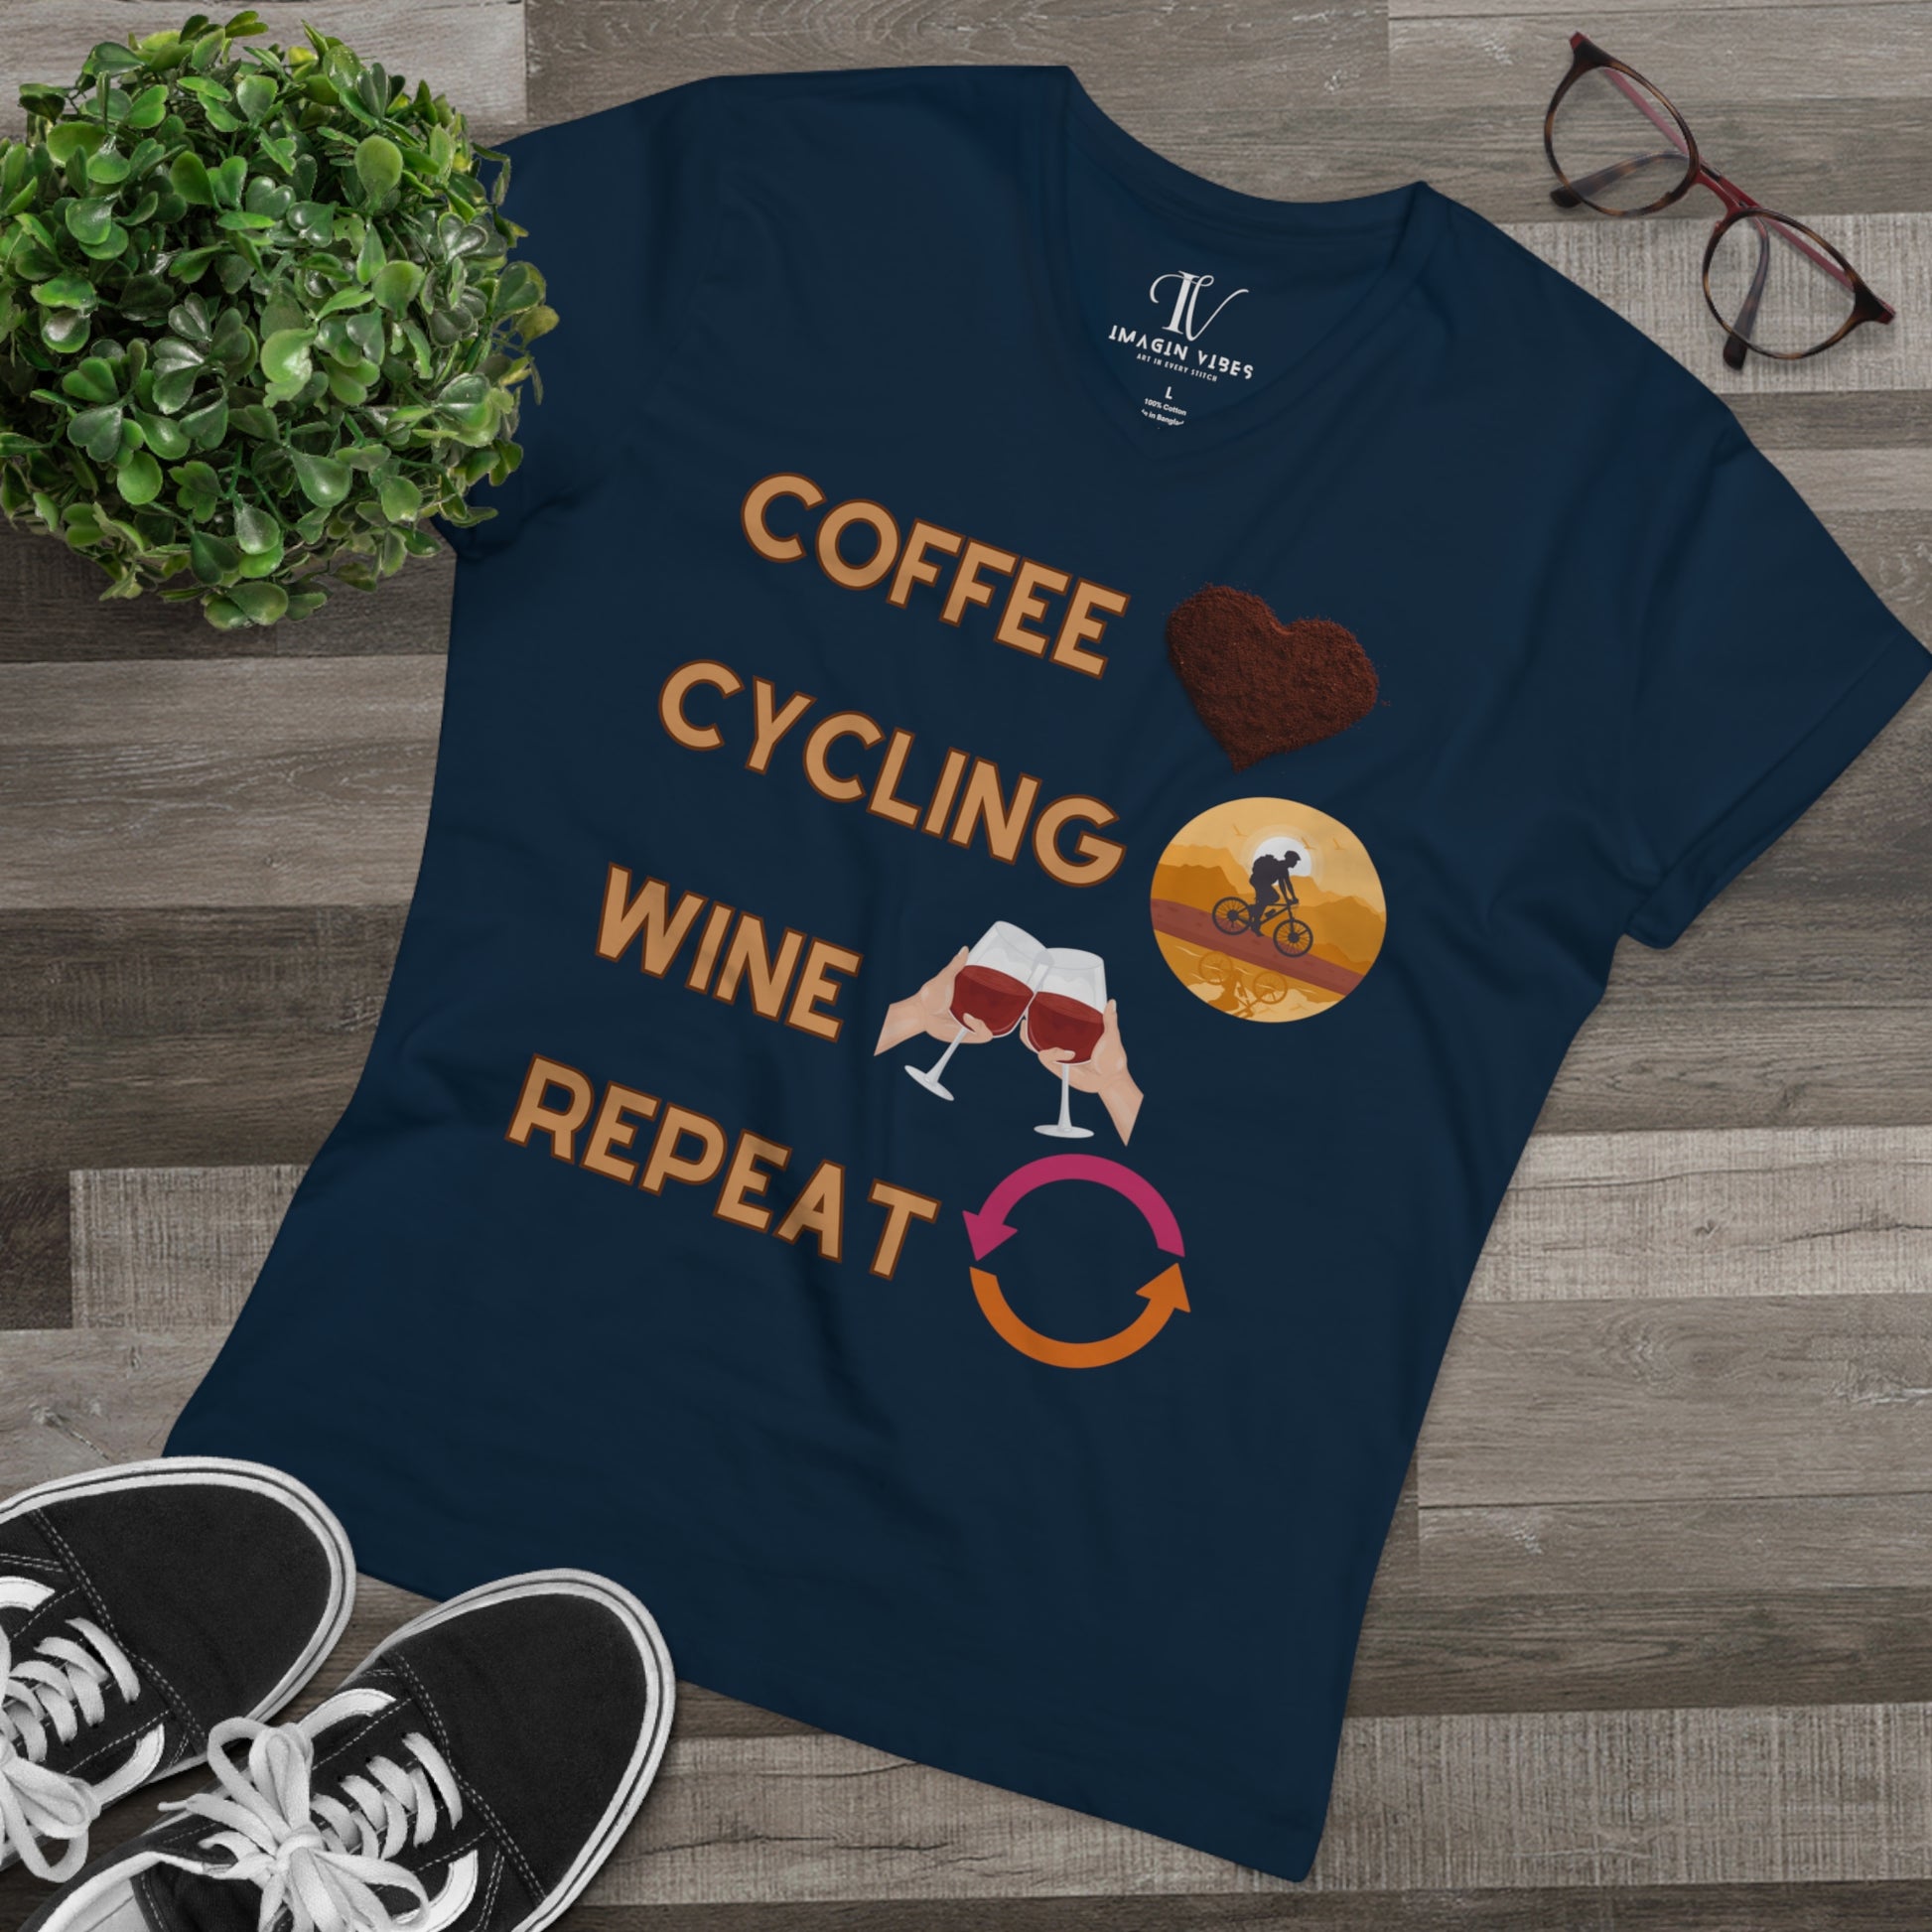 Minimalistic Bicycle T-Shirt for Men - Cotton Shirts, Eco-Friendly Gift for Coffee and Cycling Enthusiasts V-neck French Navy S 